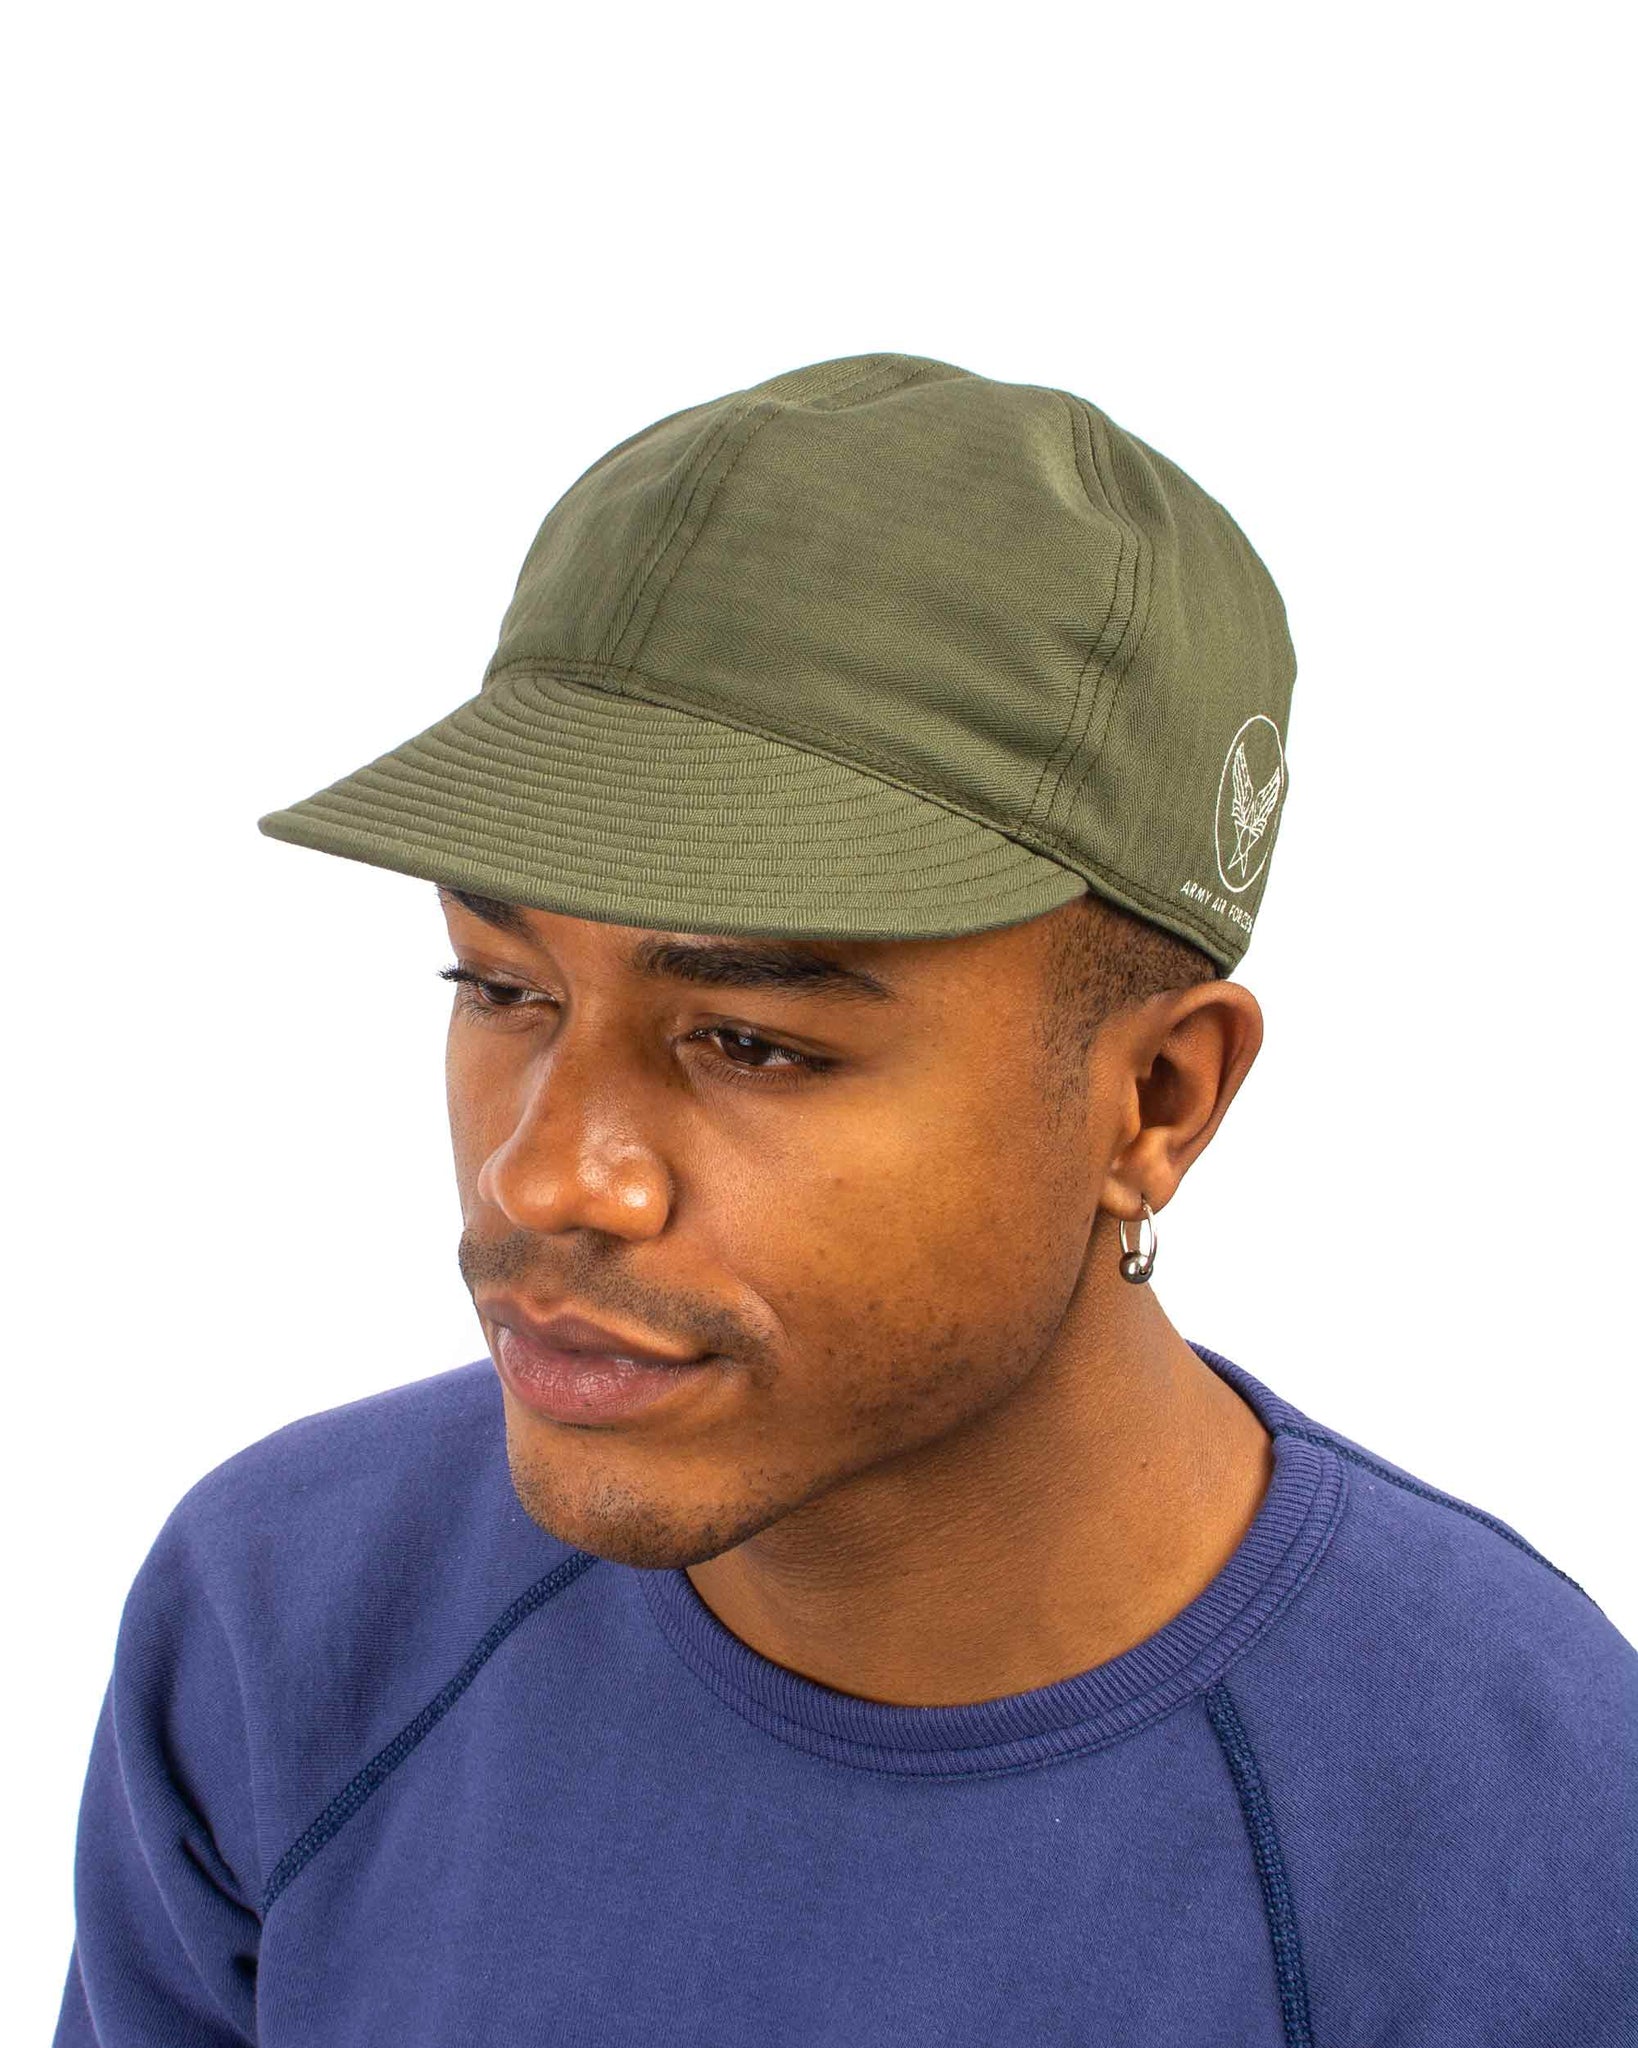 The Real McCoy's MA22001 Type A-3 Cap / Decal Olive Model